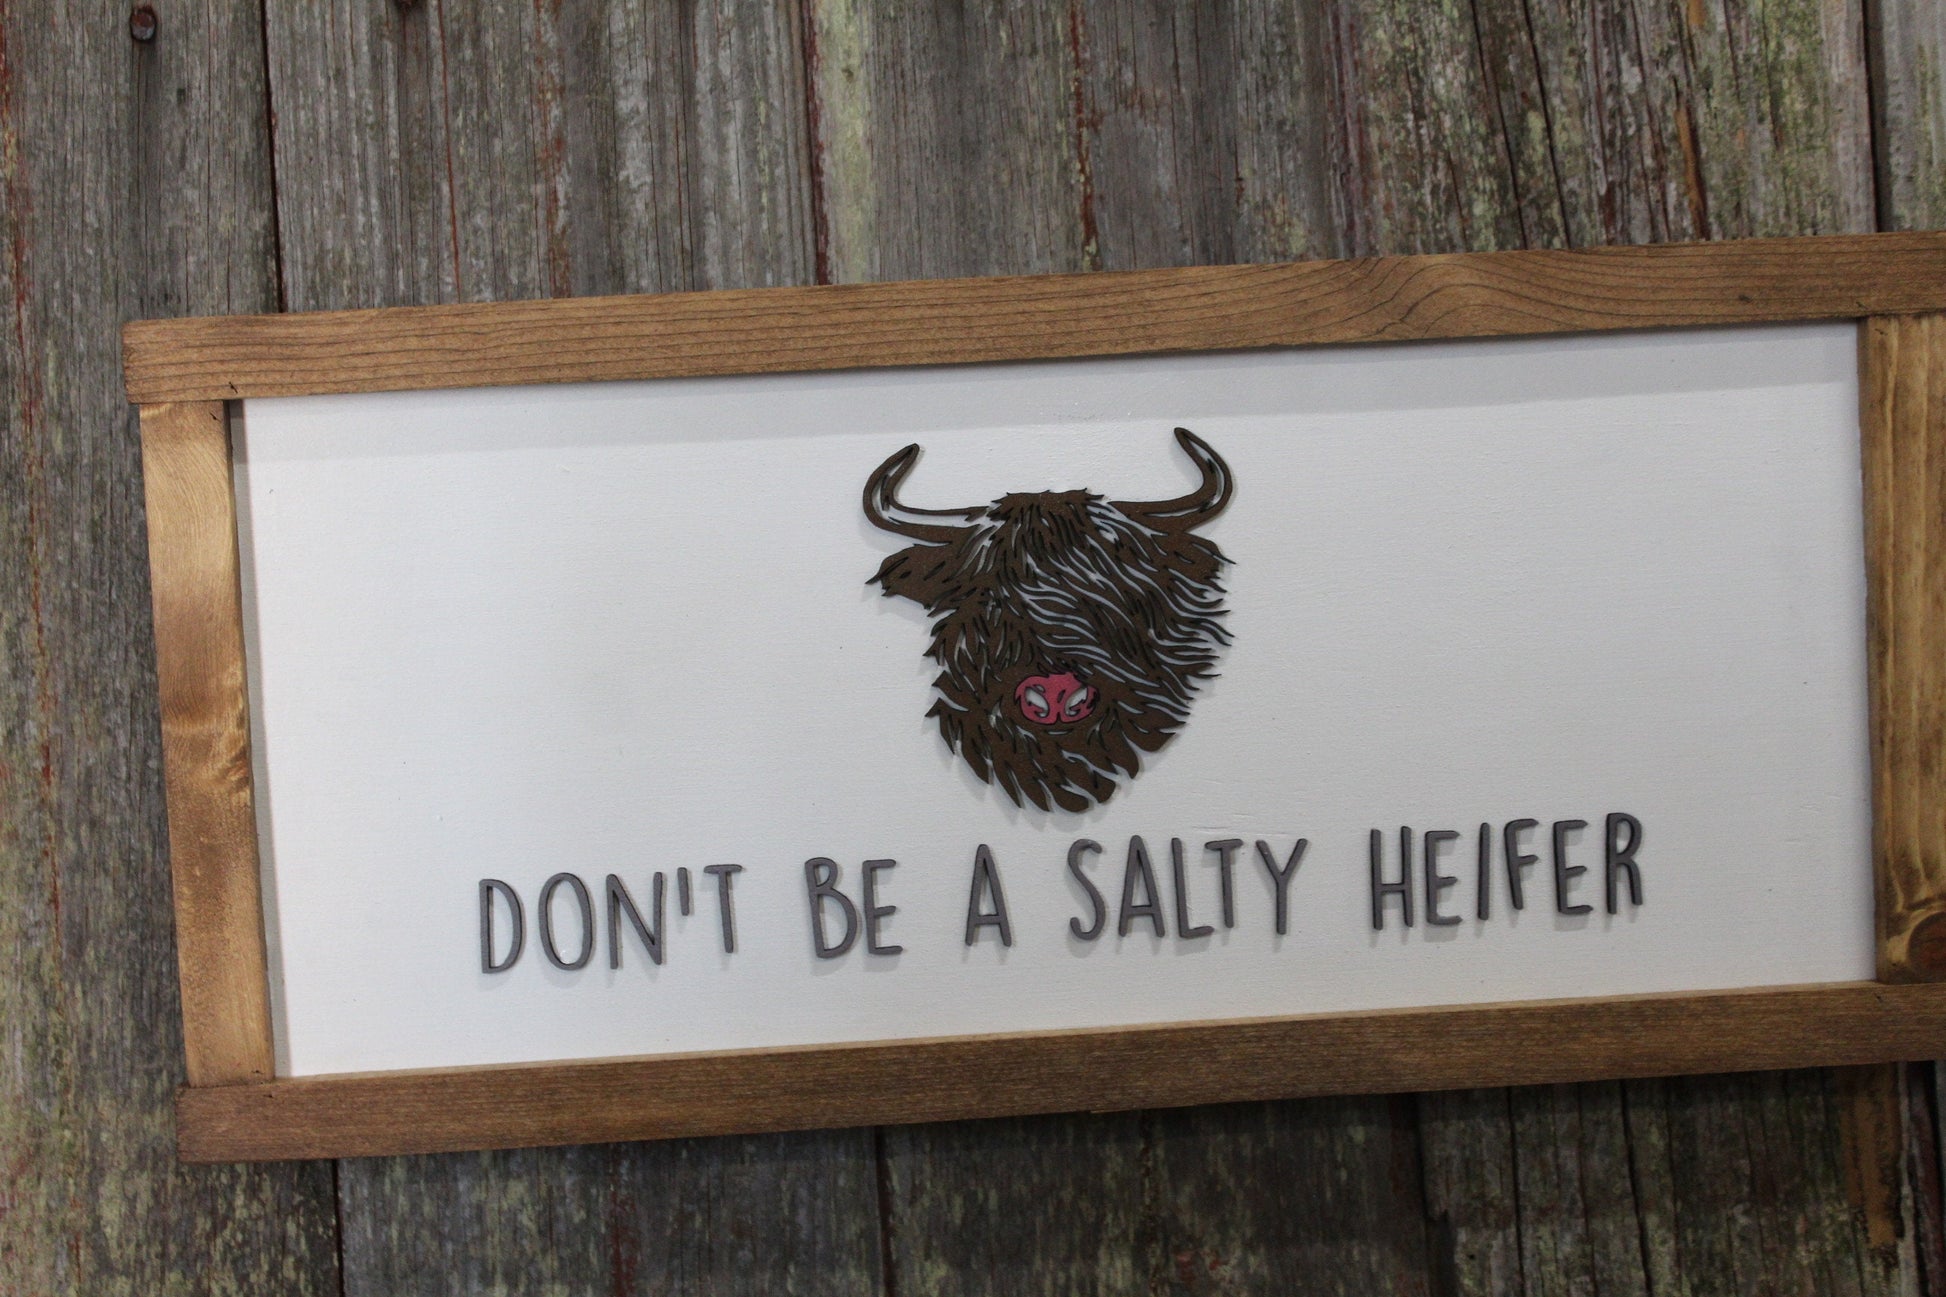 Don't be a Salty Heifer Cow Wood Sign Highland 3D Raised Text Image Long Hair Fuzzy Scottish Cow Farmhouse Handmade Sign Rustic Primitive